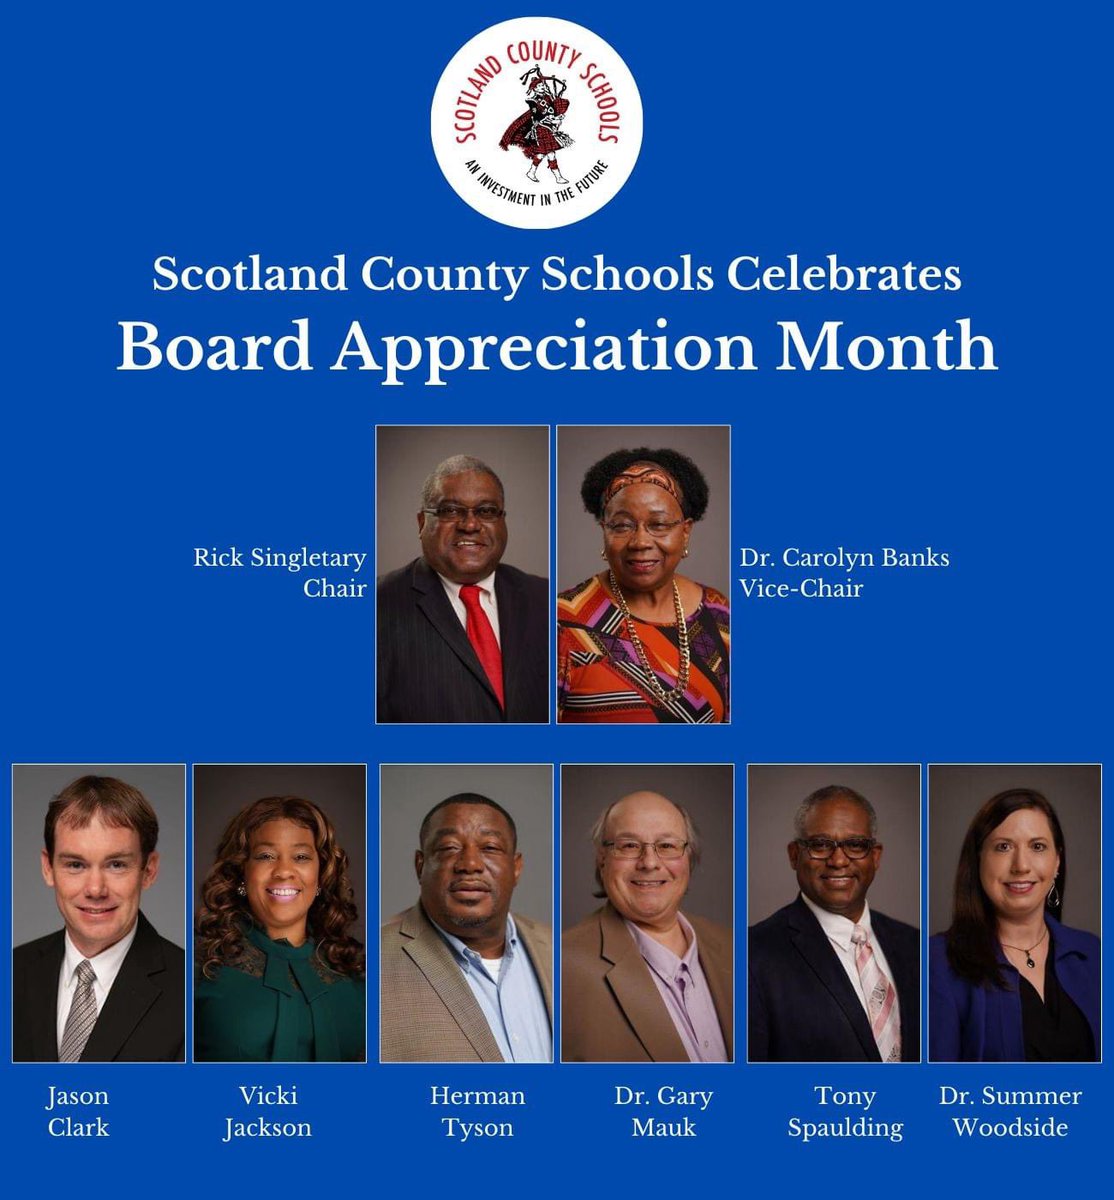 It’s School Board Appreciation Month!🍎 We would like to honor and express our gratitude to the incredible individuals who make up our BOE. Their commitment to public education is unwavering and ensuring the success of every student is at the forefront of each decision they make.